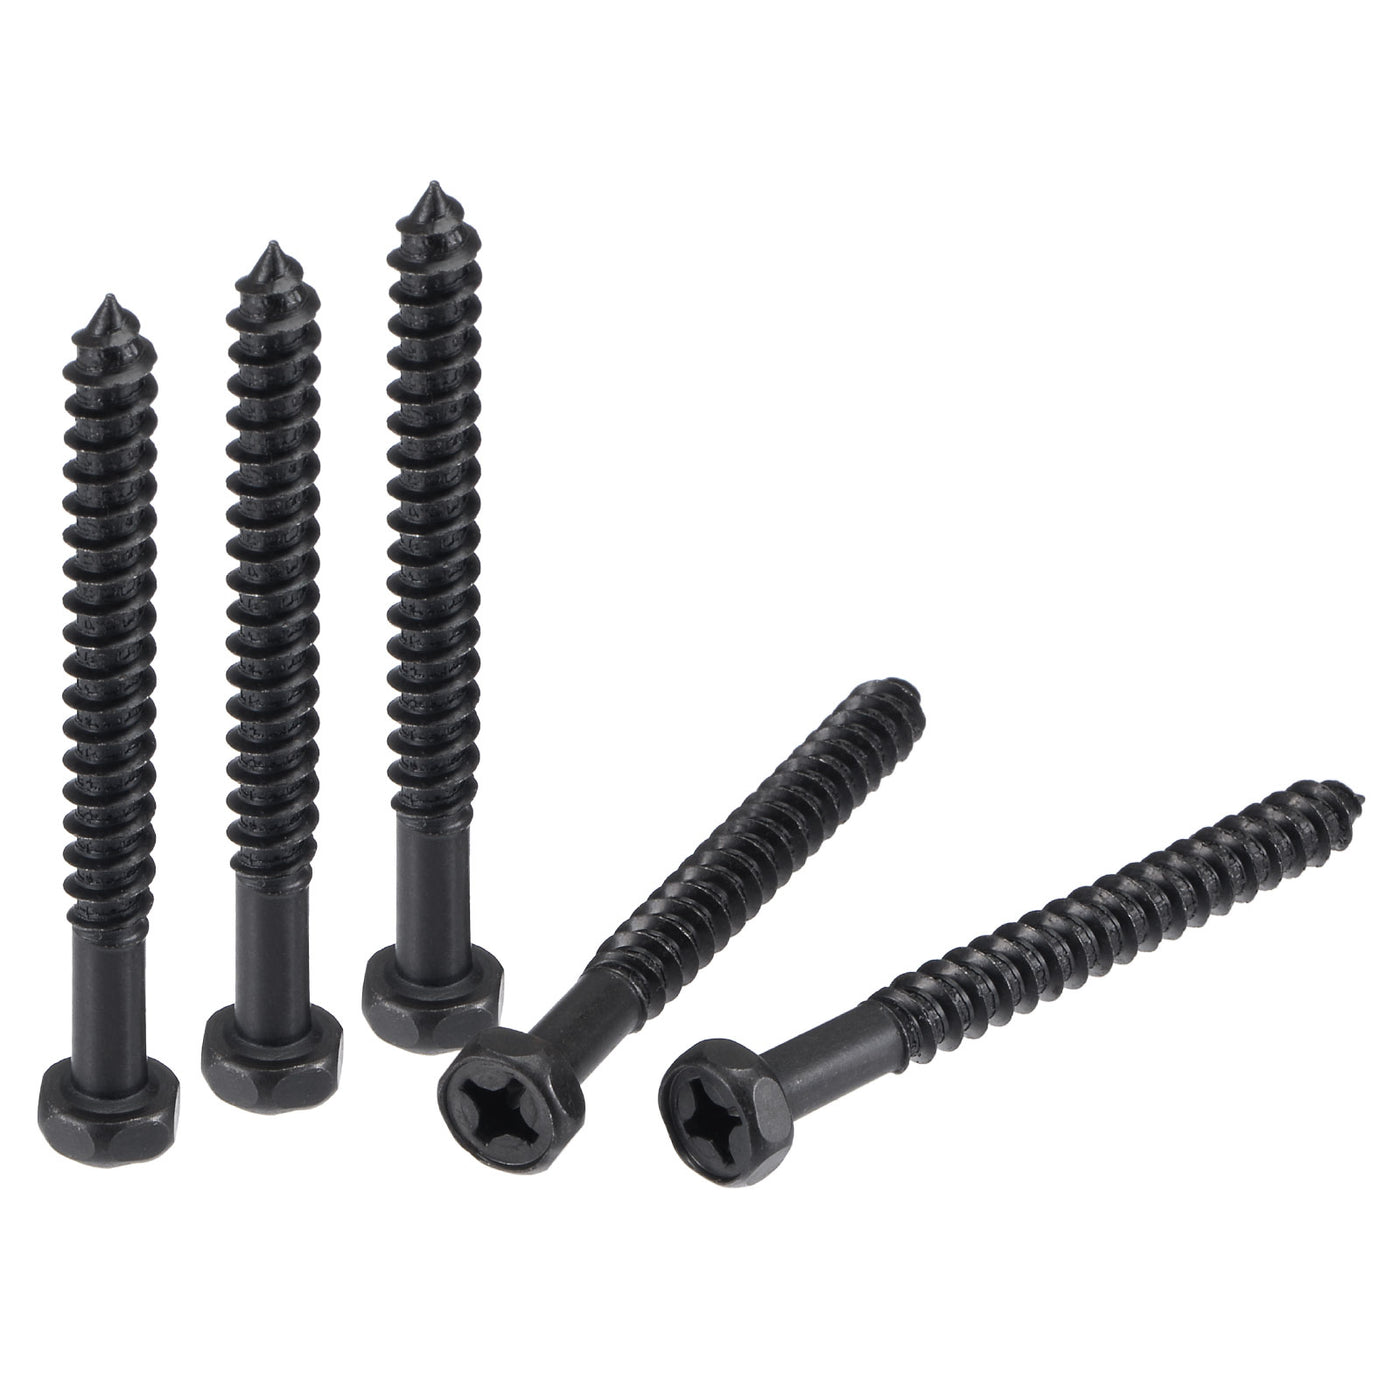 Uxcell Uxcell Hex Lag Screws 1/4" x 2-3/4" Carbon Steel Half Thread Self-Tapping 25pcs